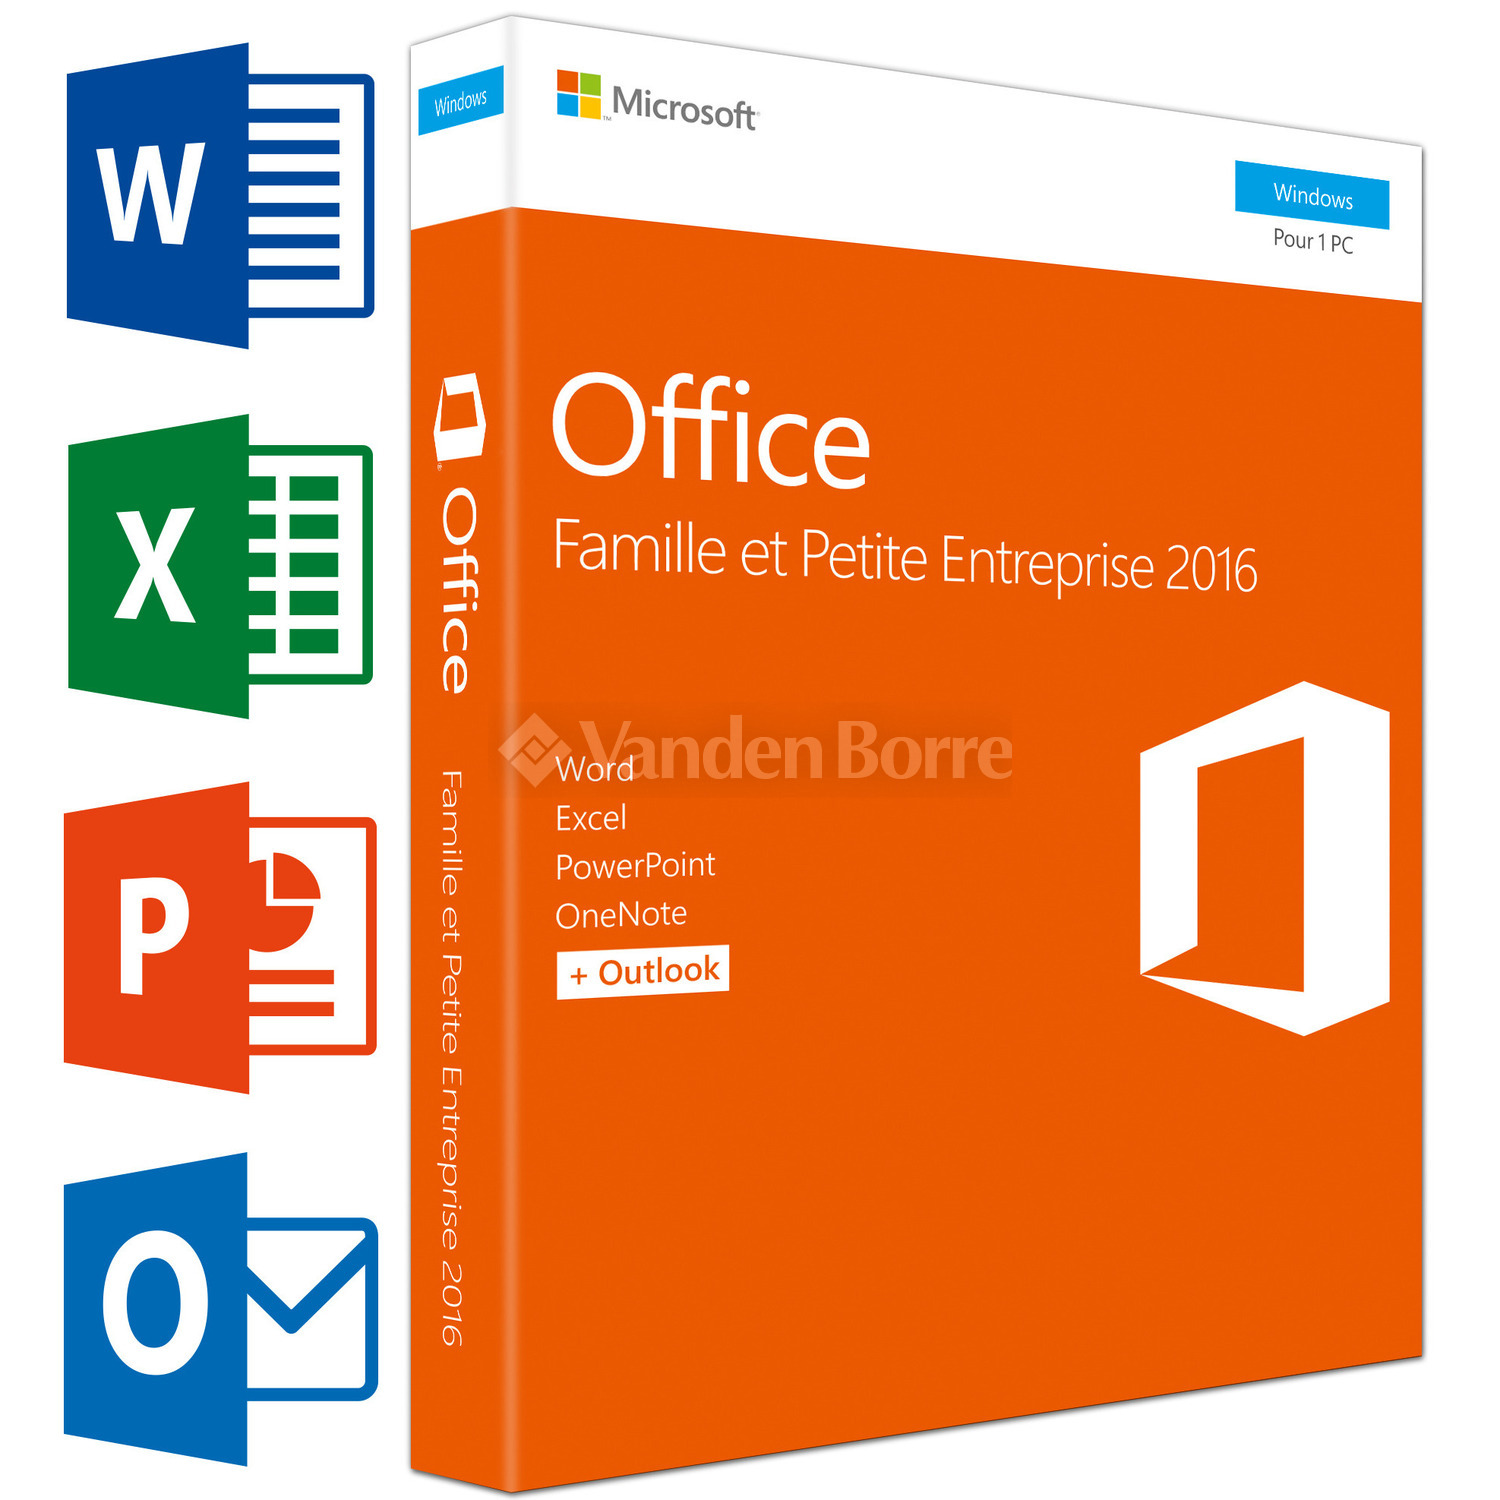 microsoft office 2016 home and business for mac